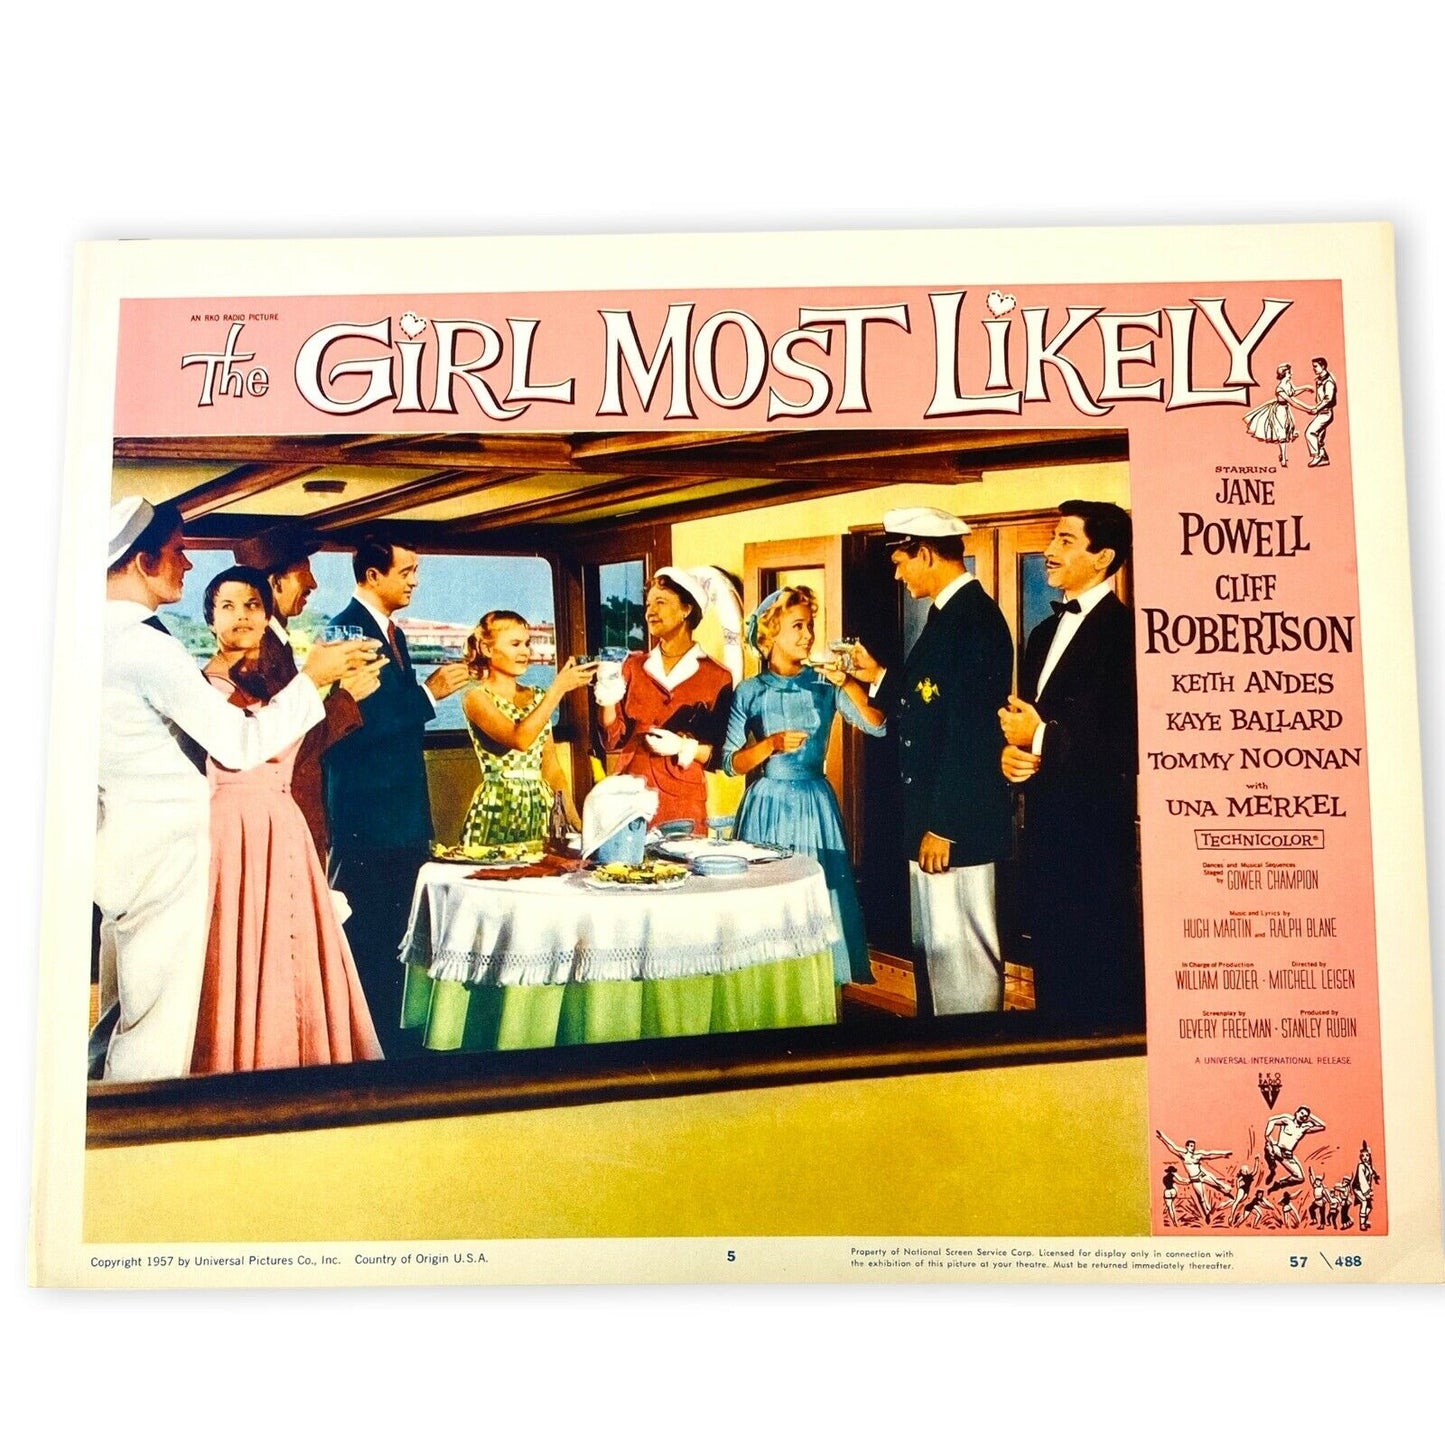 The Girl Most Likely ORIGINAL 1957 Lobby Card 5 Vintage RomCom Pink Movie Poster